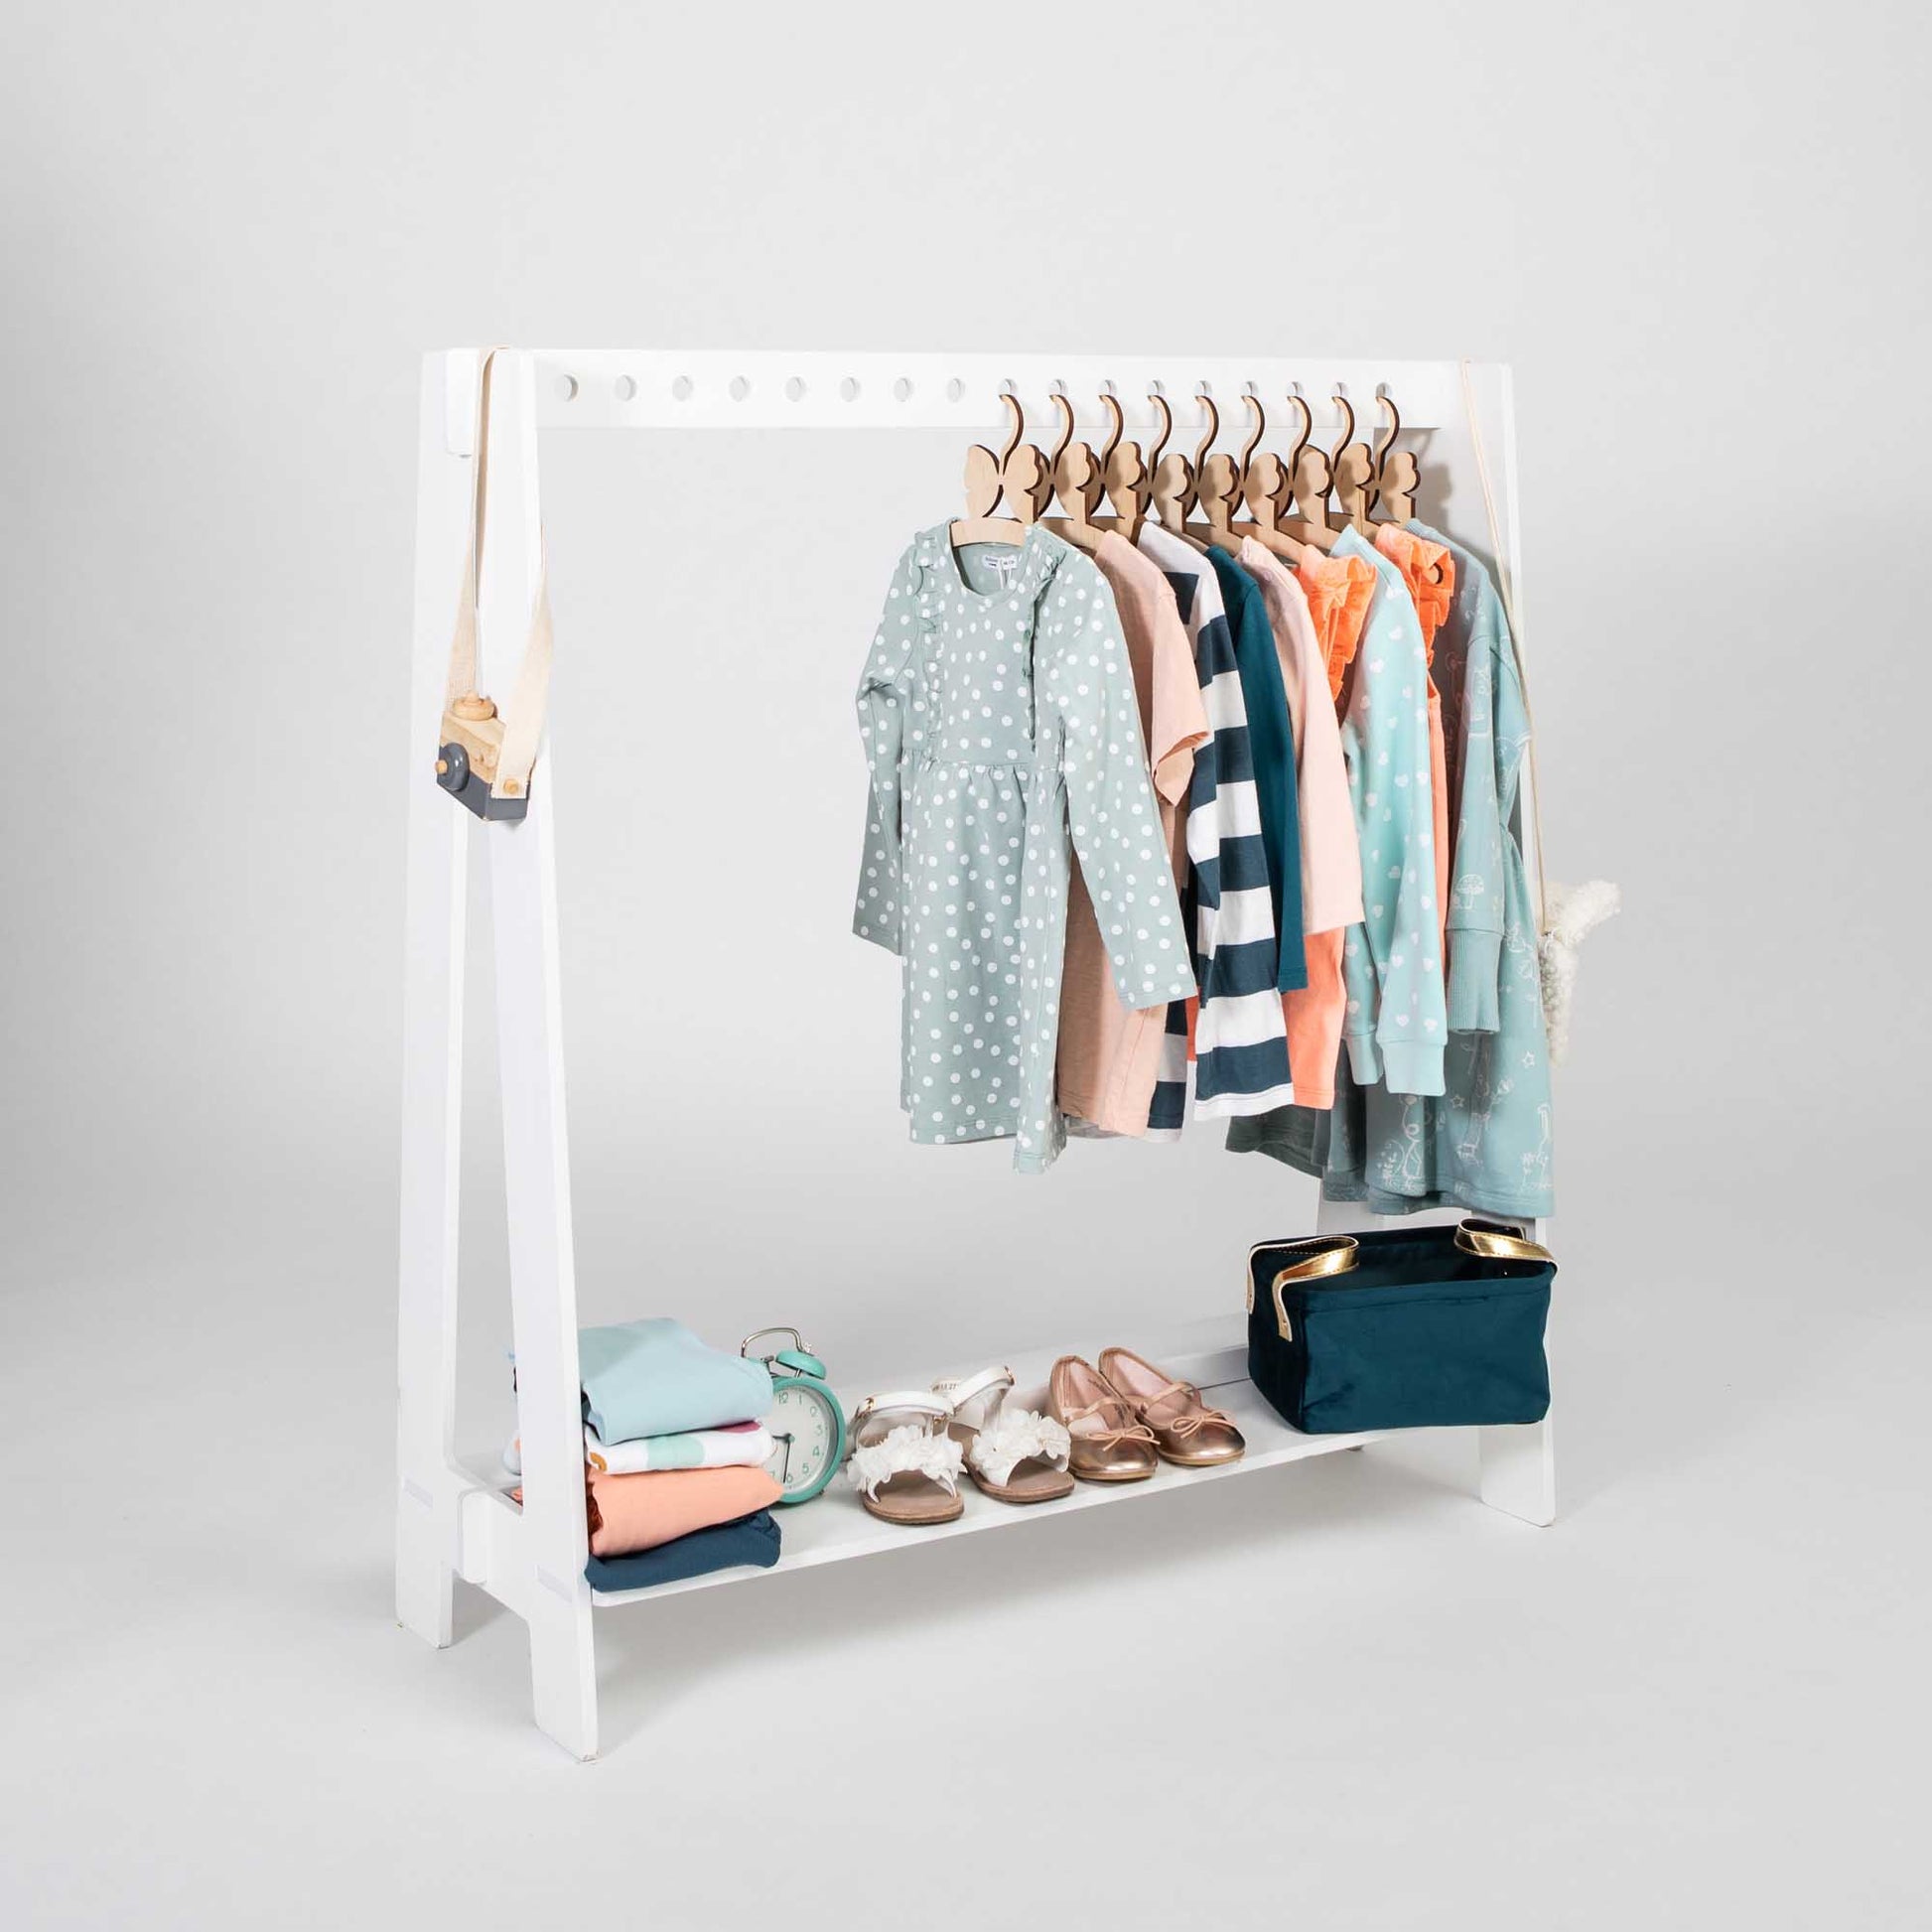 Coat Hanger Apparel Hangers Display Stand Small Kids Clothes